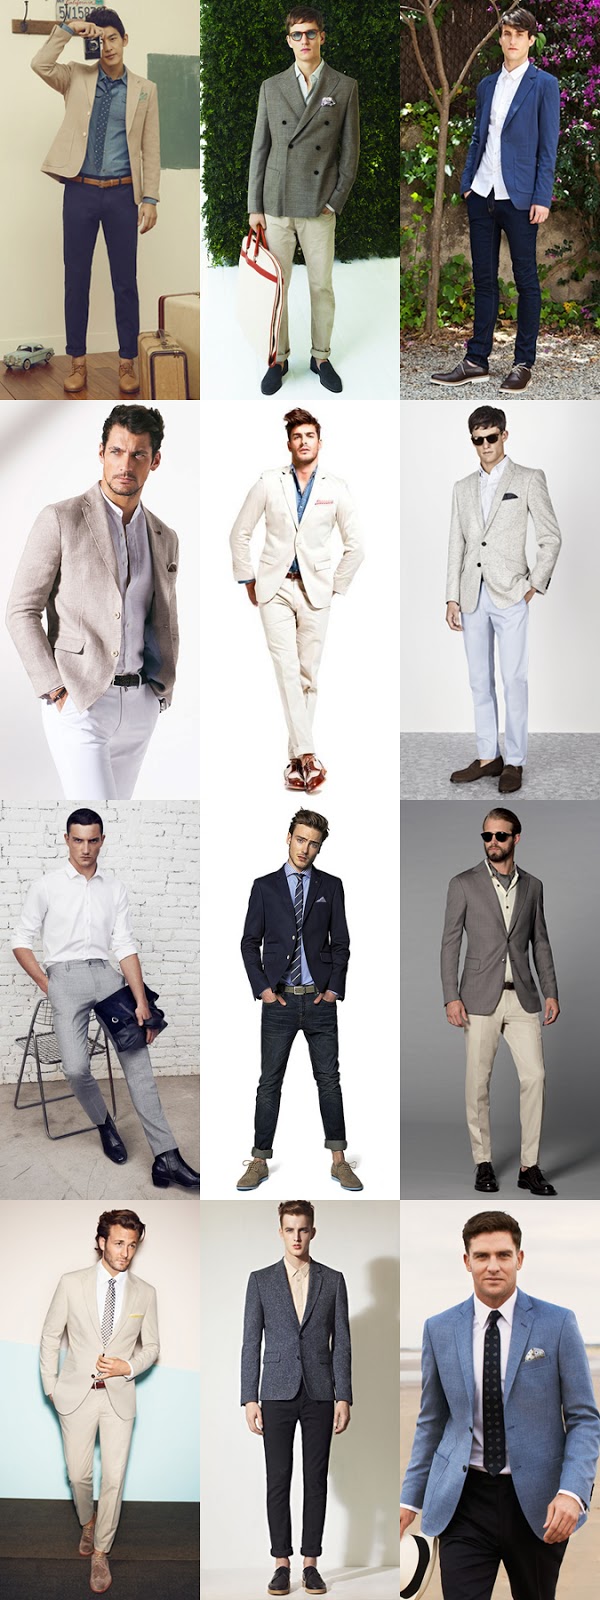 Gents Fashion: Men’s Guide To Business Casual – The Summer Edition